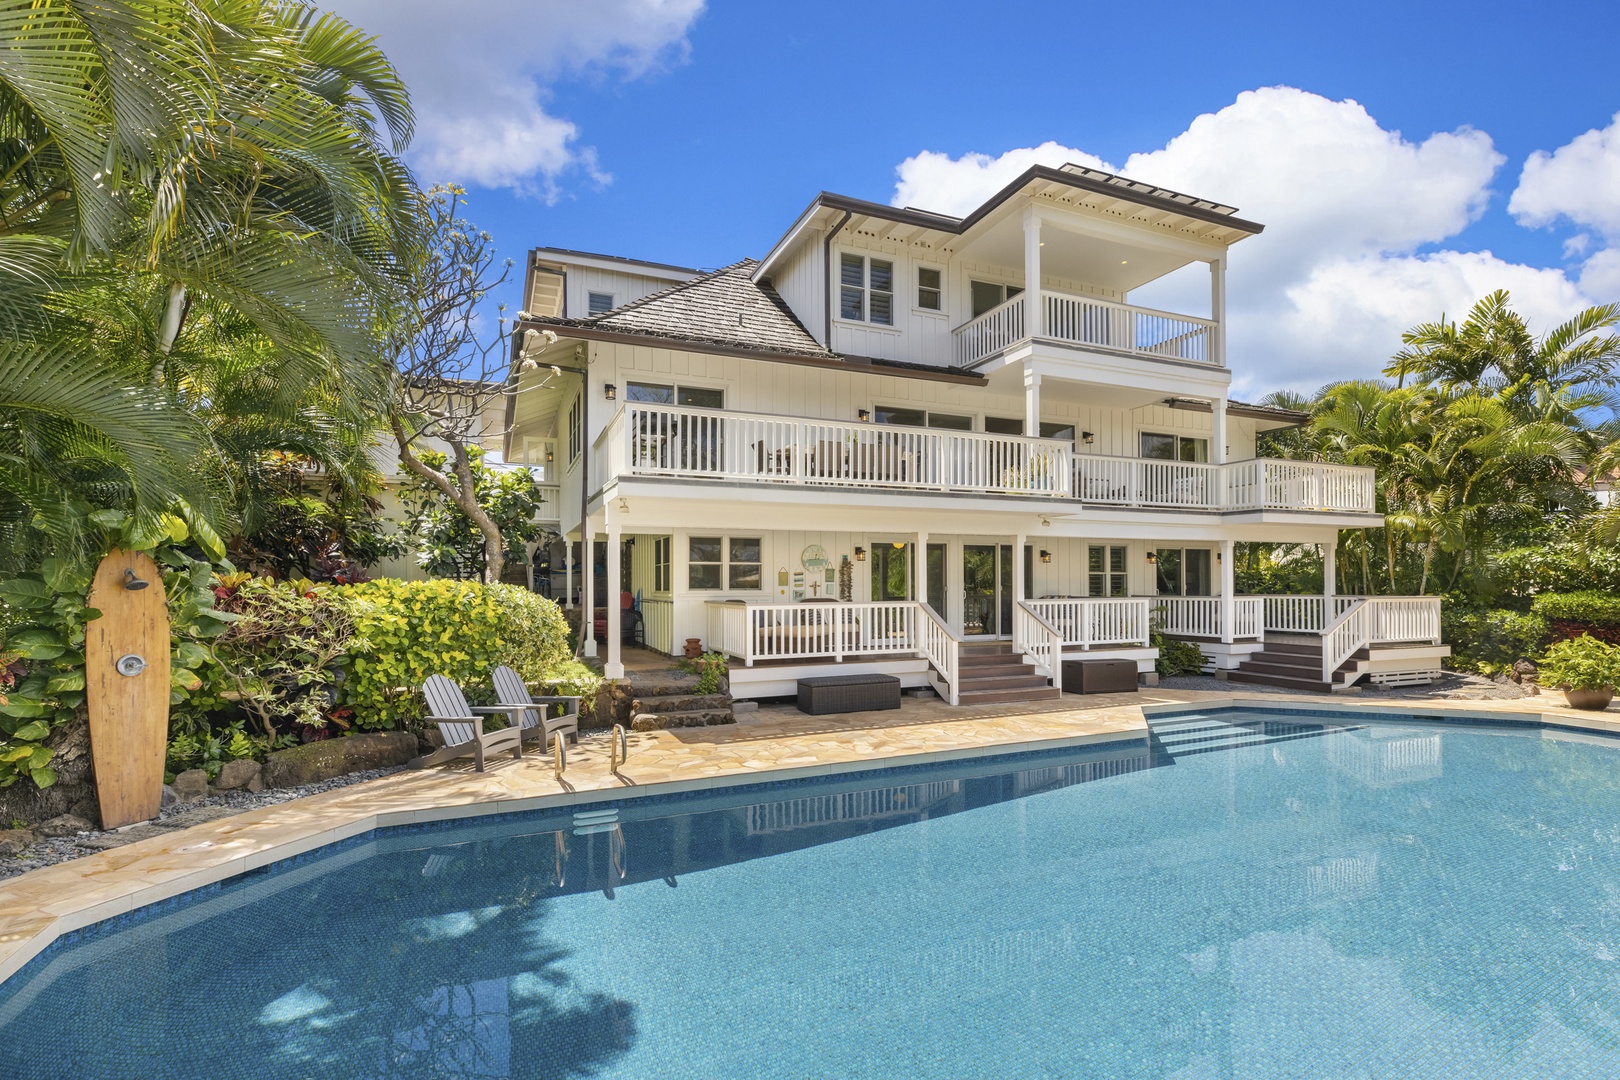 Honolulu Vacation Rentals, Hale Le'ahi - Let the crystal clear pool sooth your soul